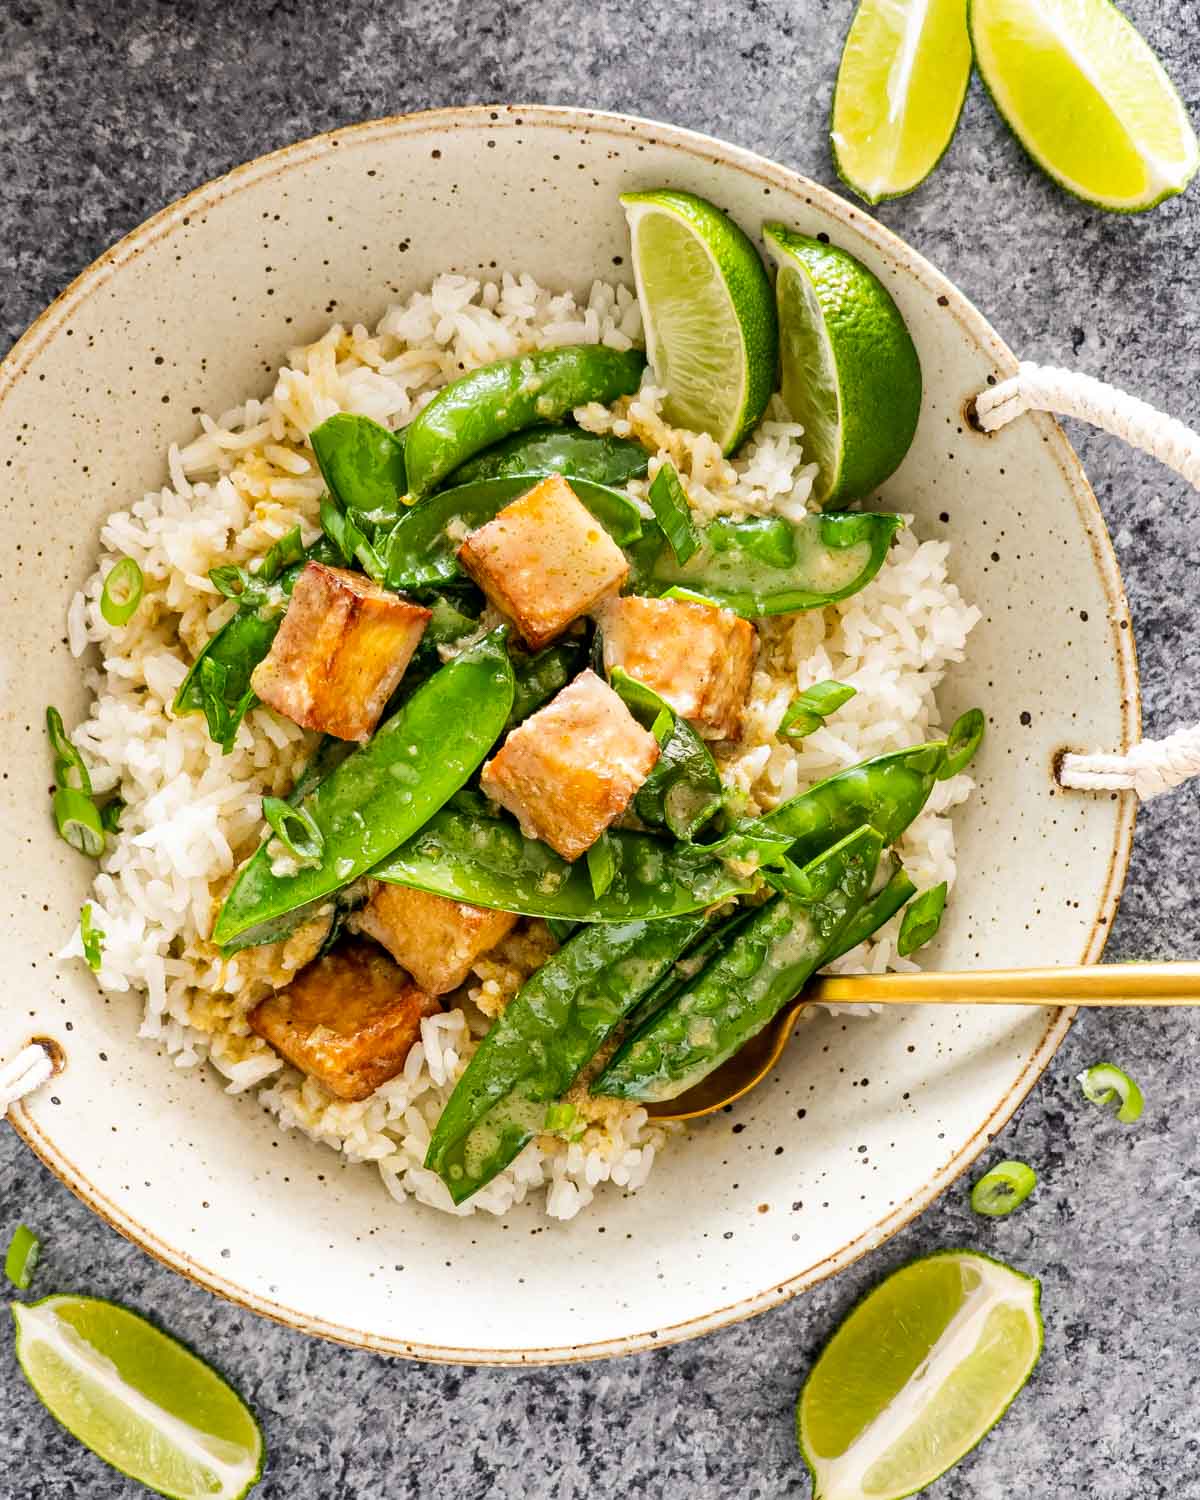 green curry with tofu over a bed of rice.